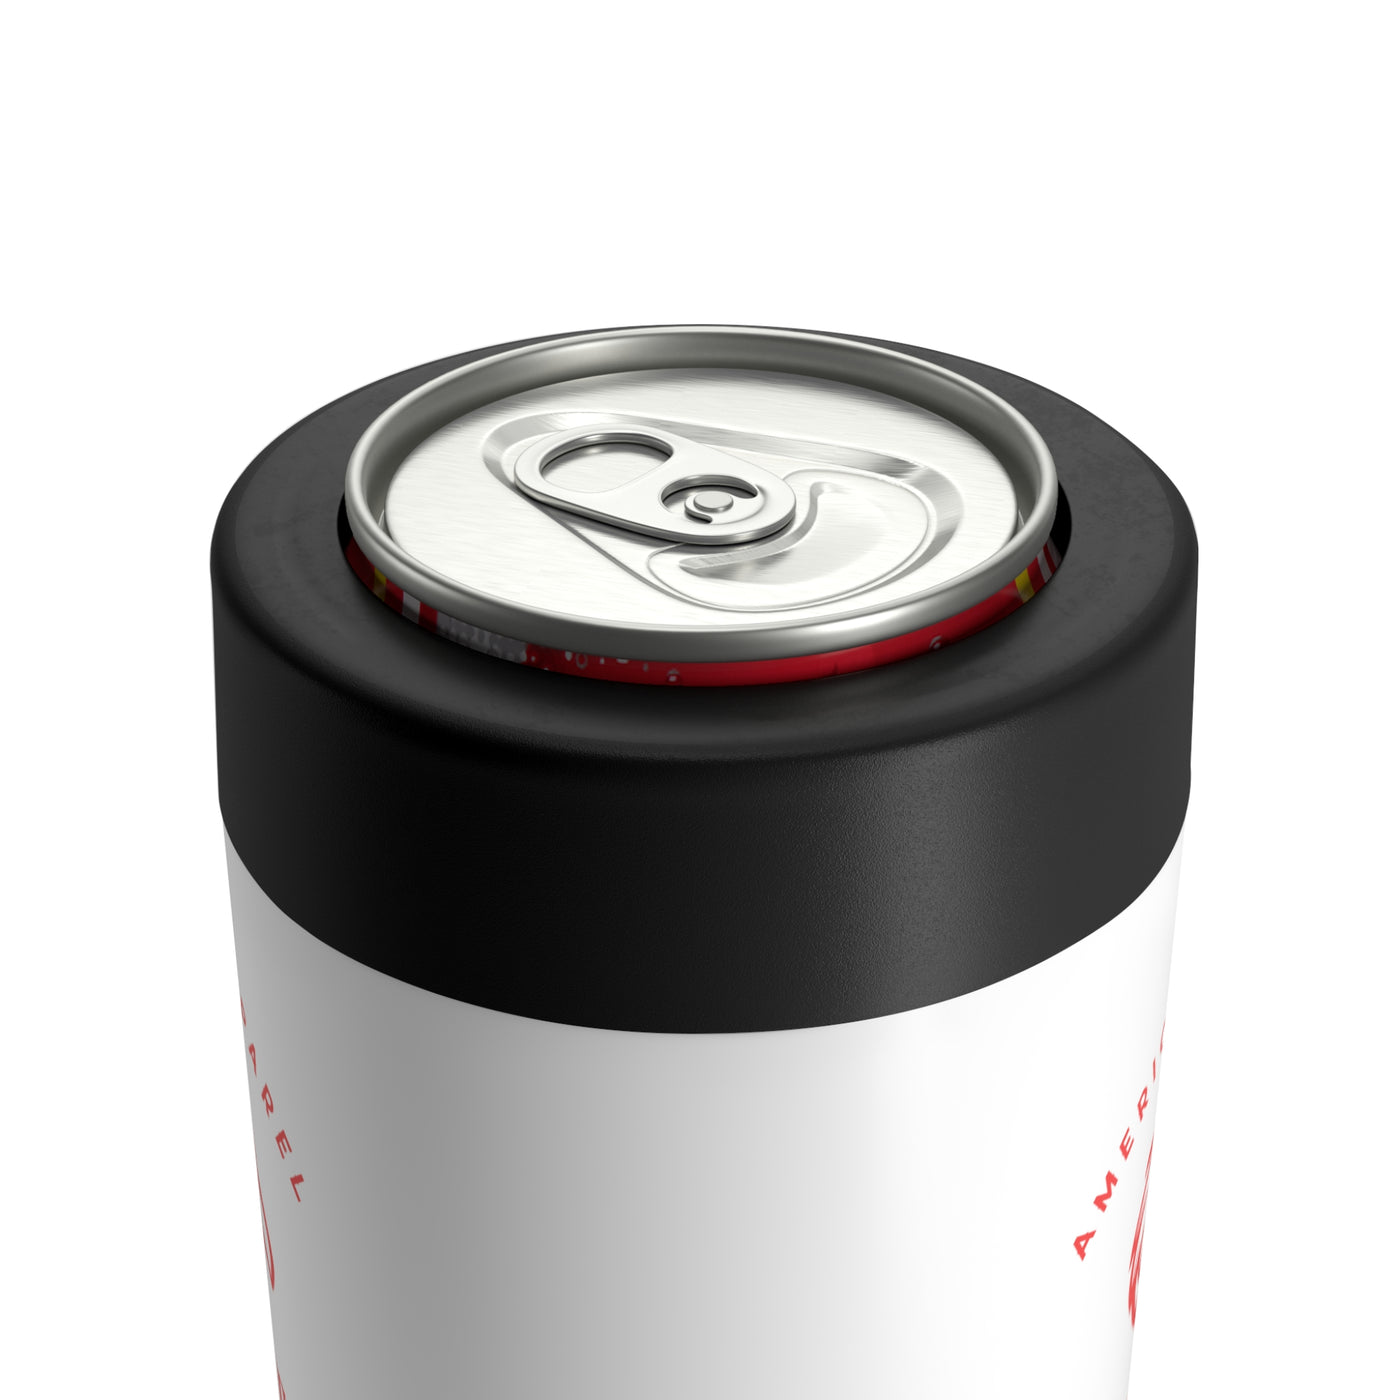 One Charlie Kilo Stainless Steel Can Holder